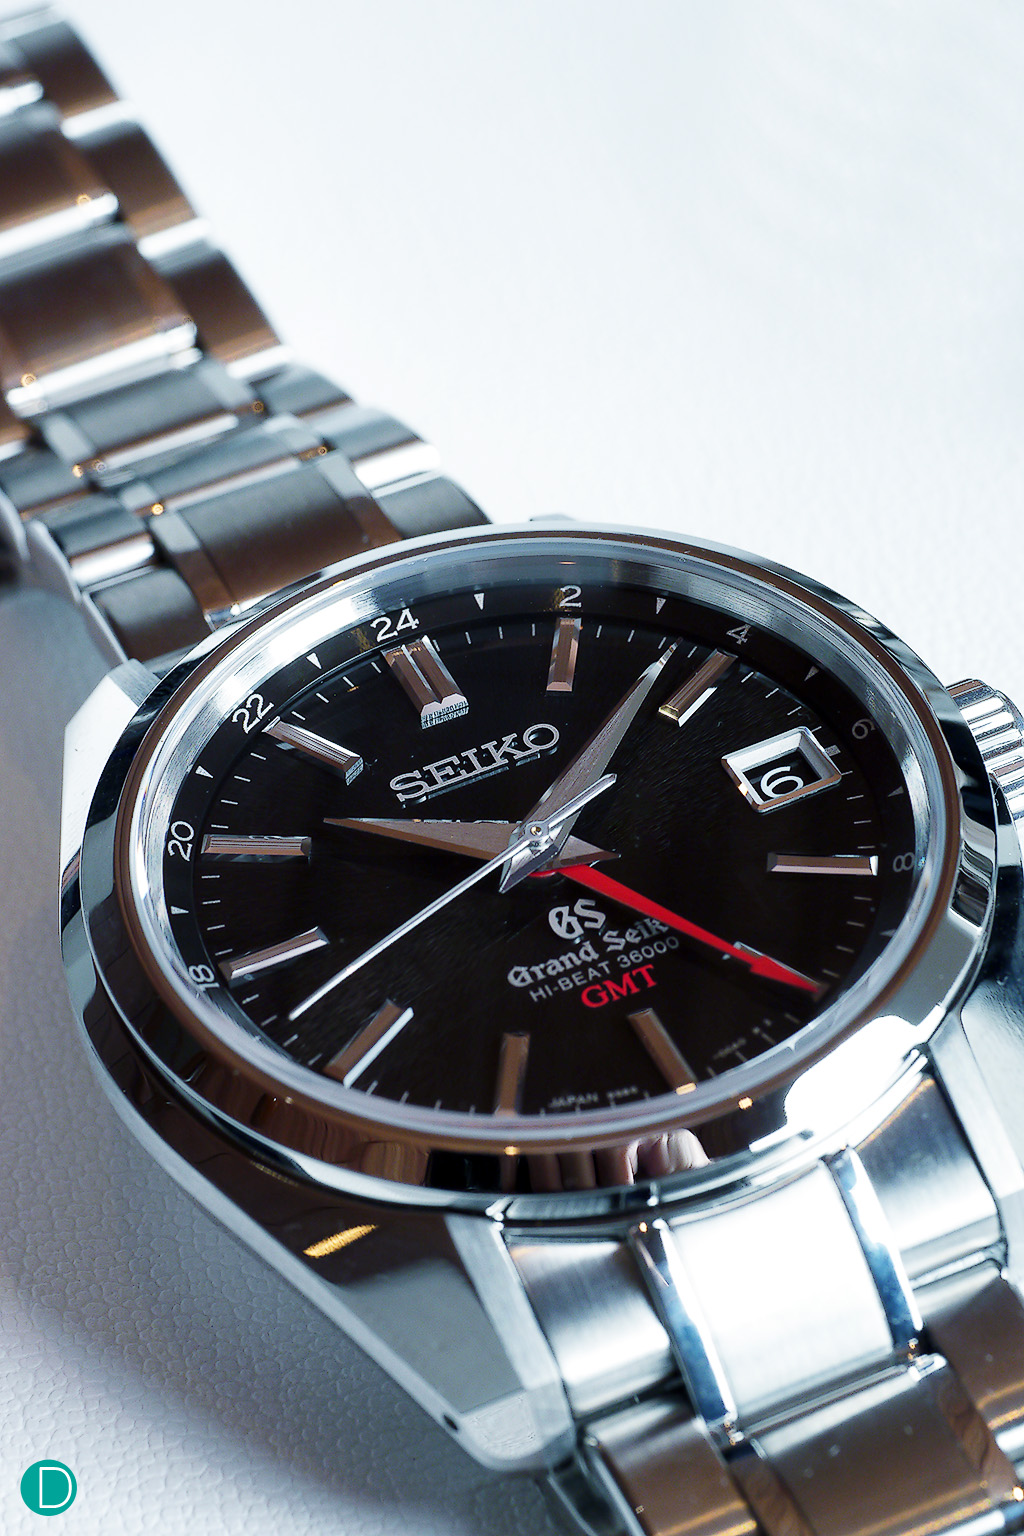 The SBGJ003, also known as the Mechanical Hi-Beat 36000 GMT with the black dial.